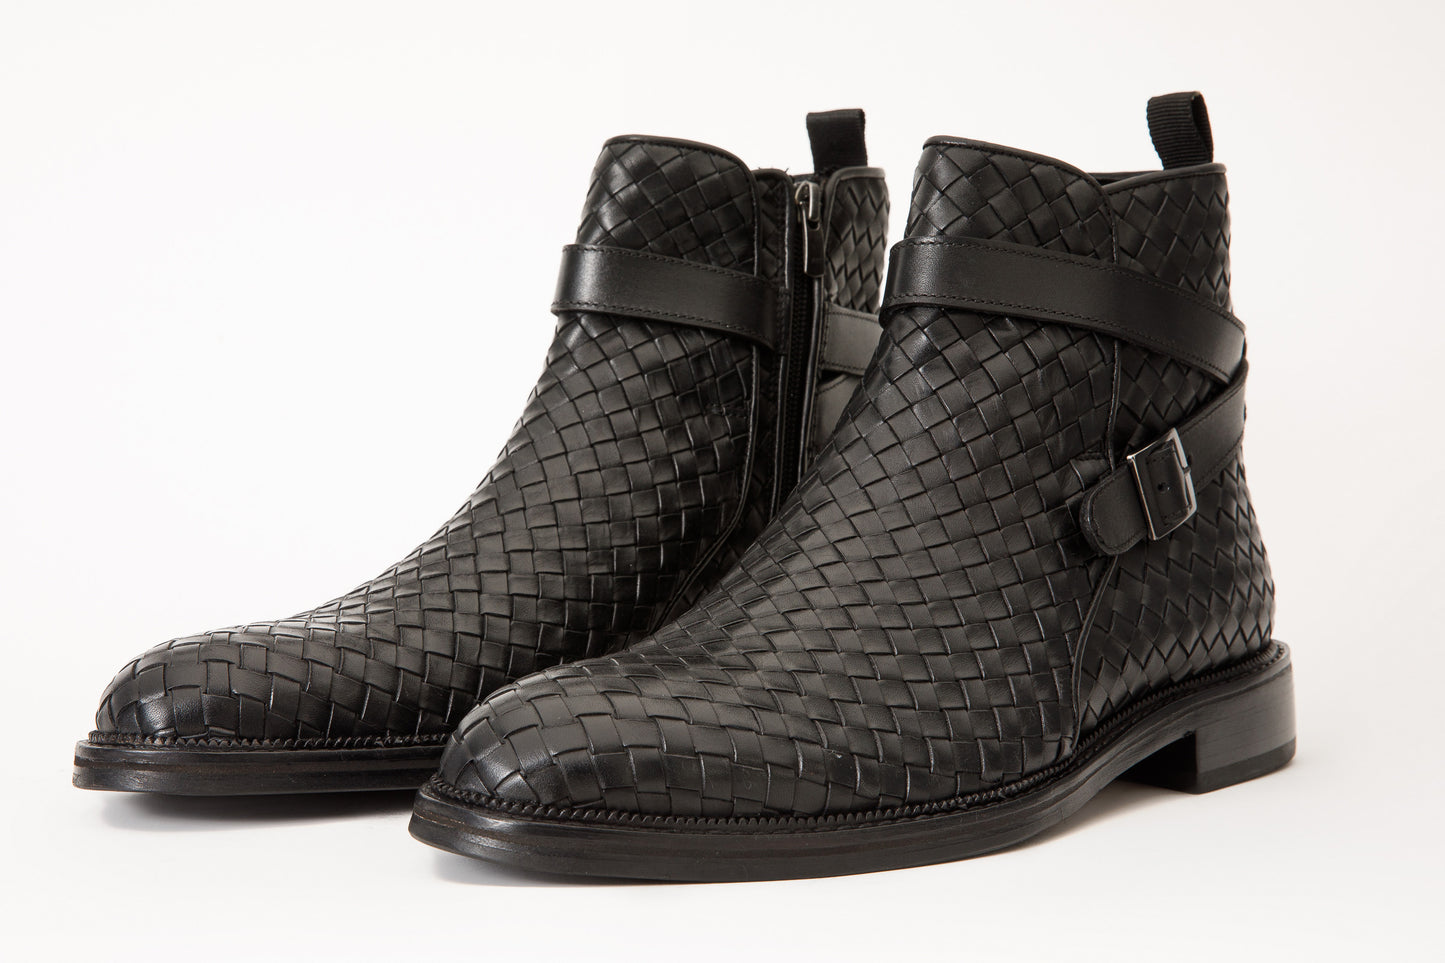 The Morral Black Handwoven Leather Cross Strap Buckle Zip-Up Men Boot